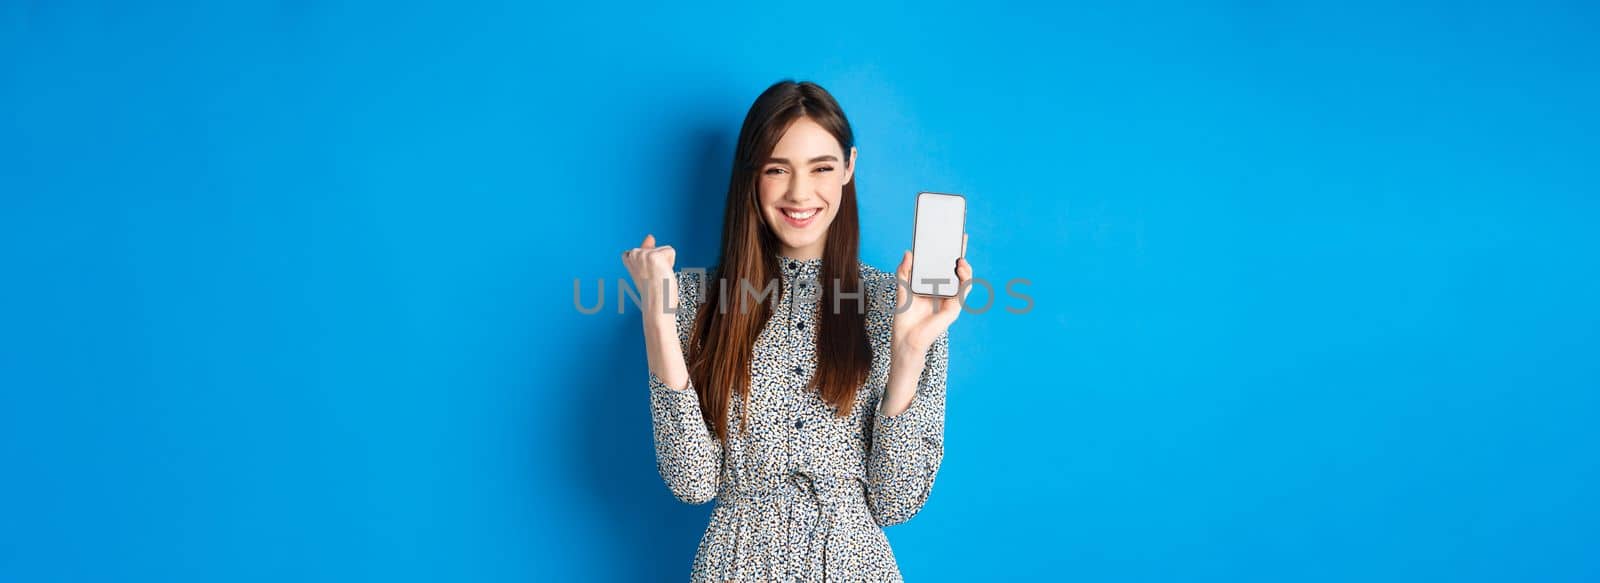 Cheerful pretty girl chanting, winning on mobile phone, showing empty smartphone screen and fist pump, smiling and celebrating, blue background by Benzoix